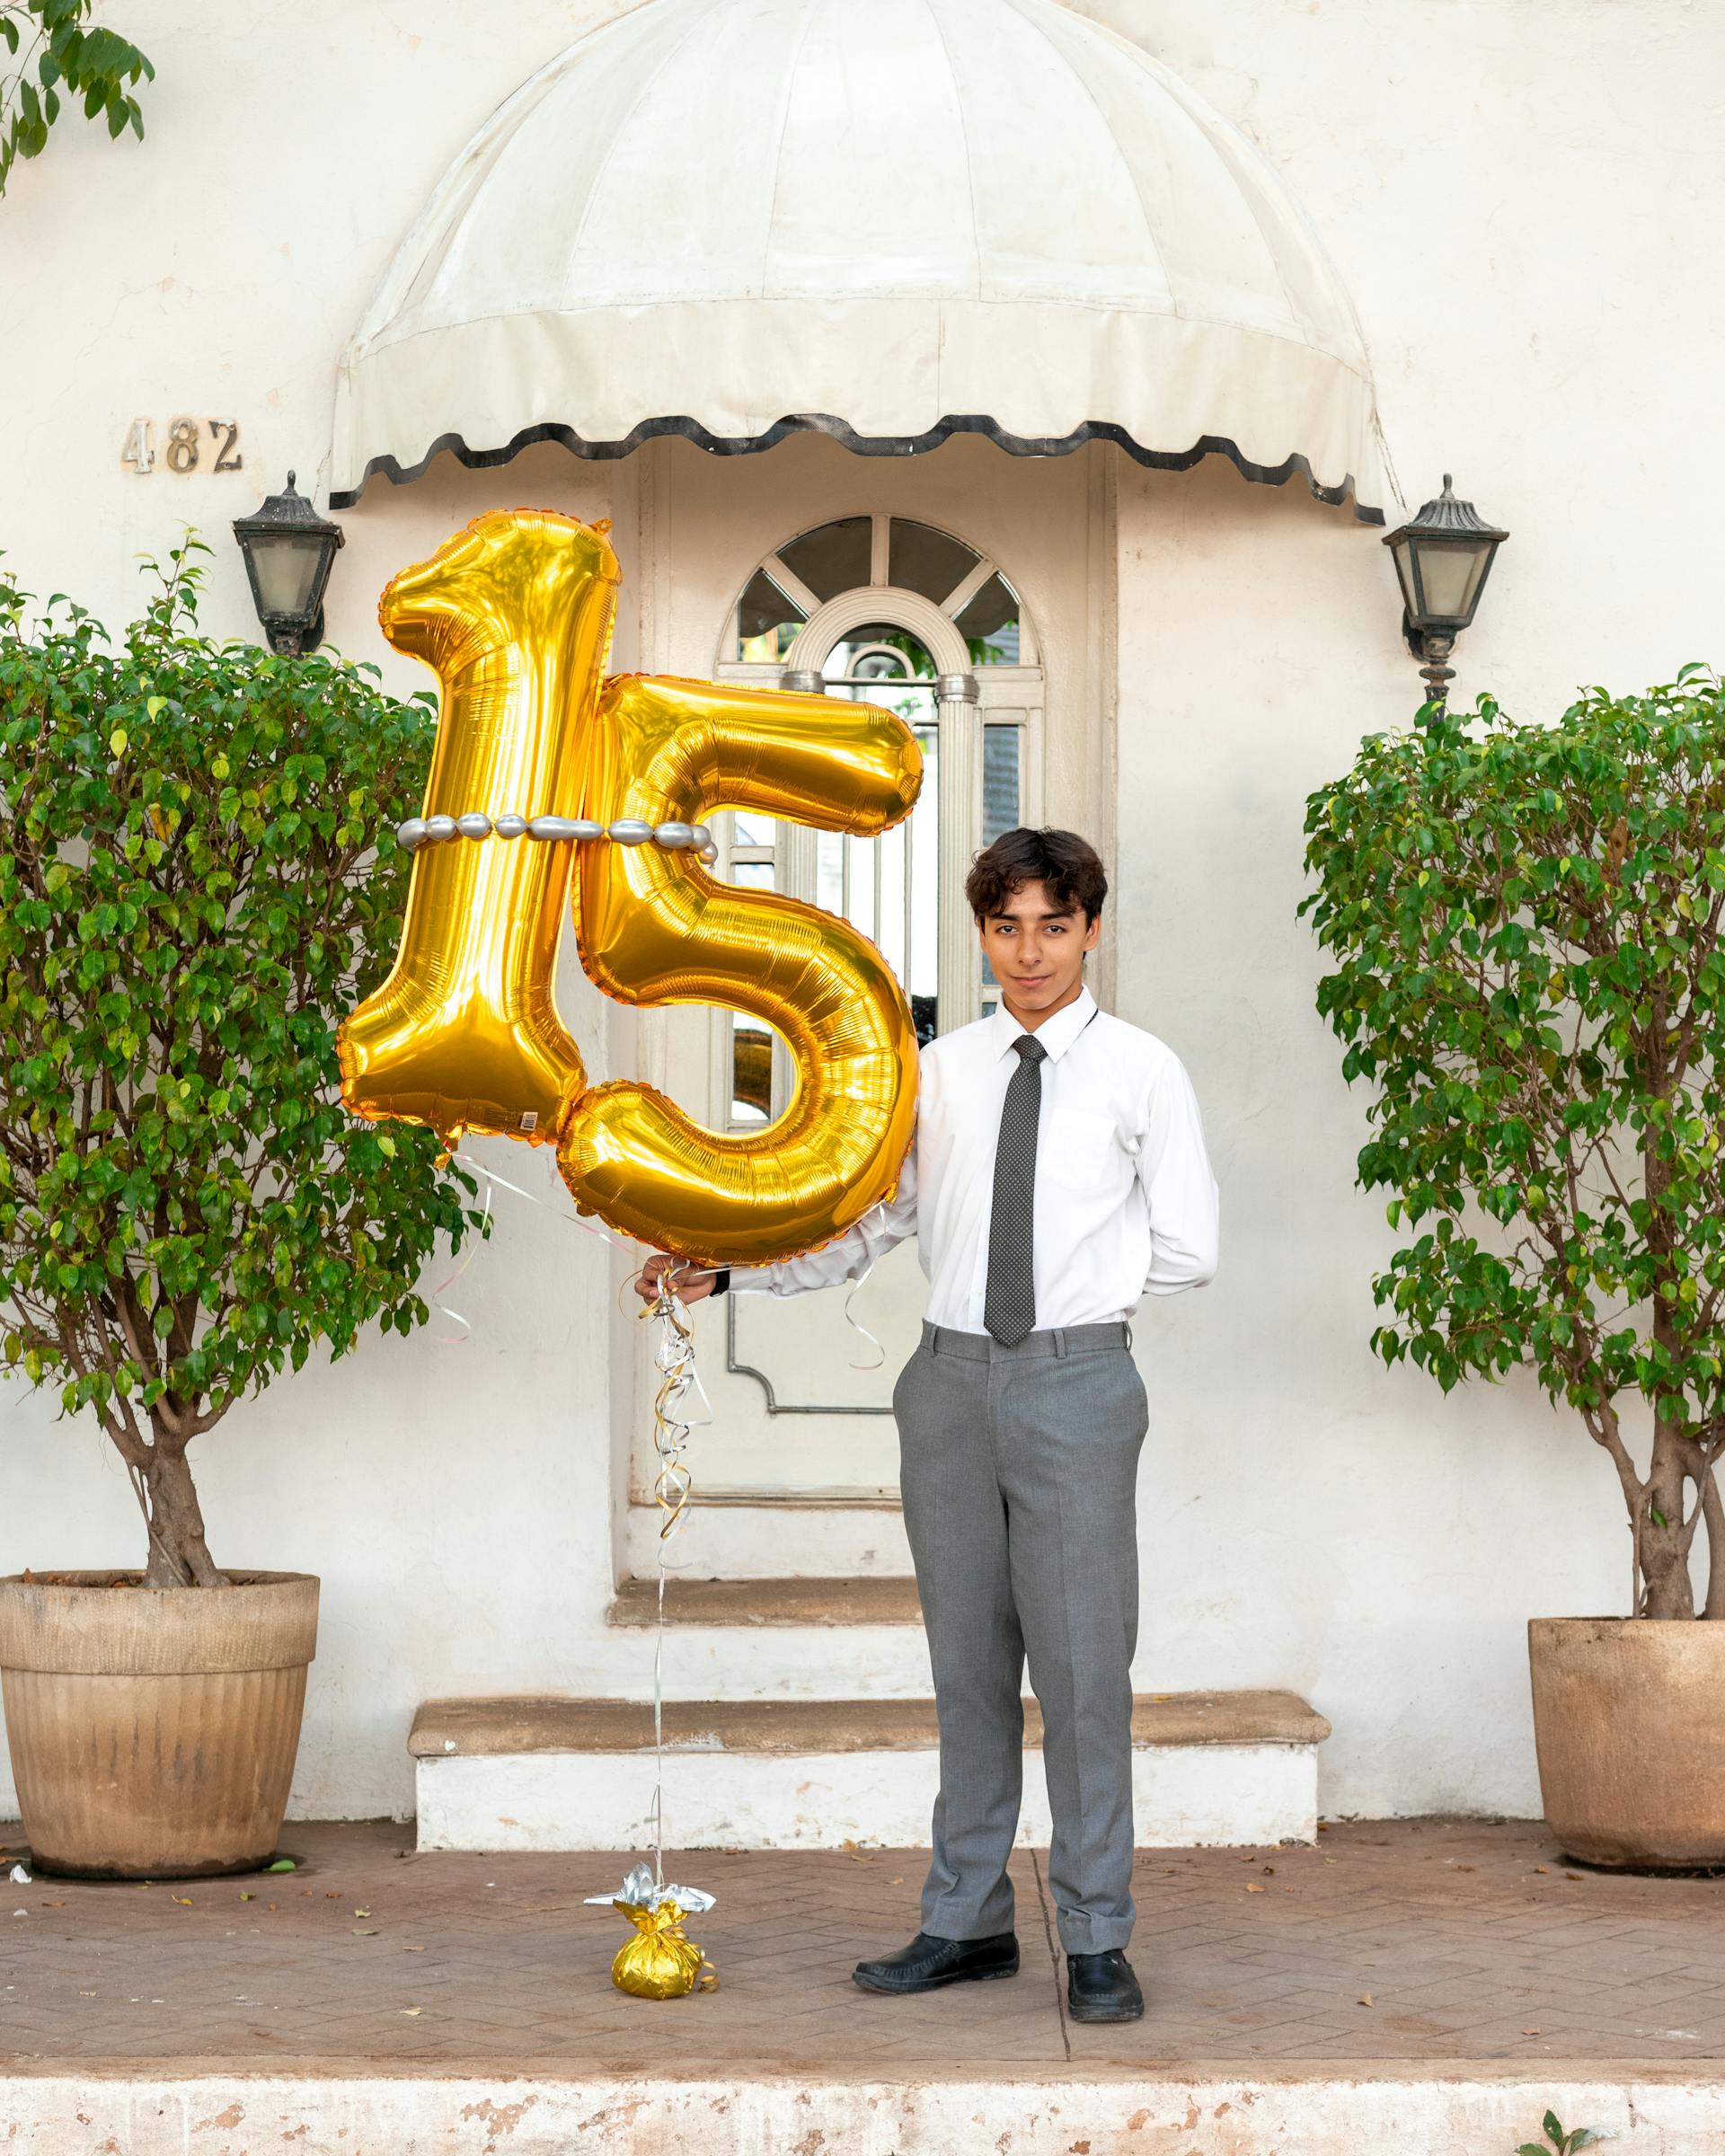 A boy standing with birthday balloons | Source: Pexels